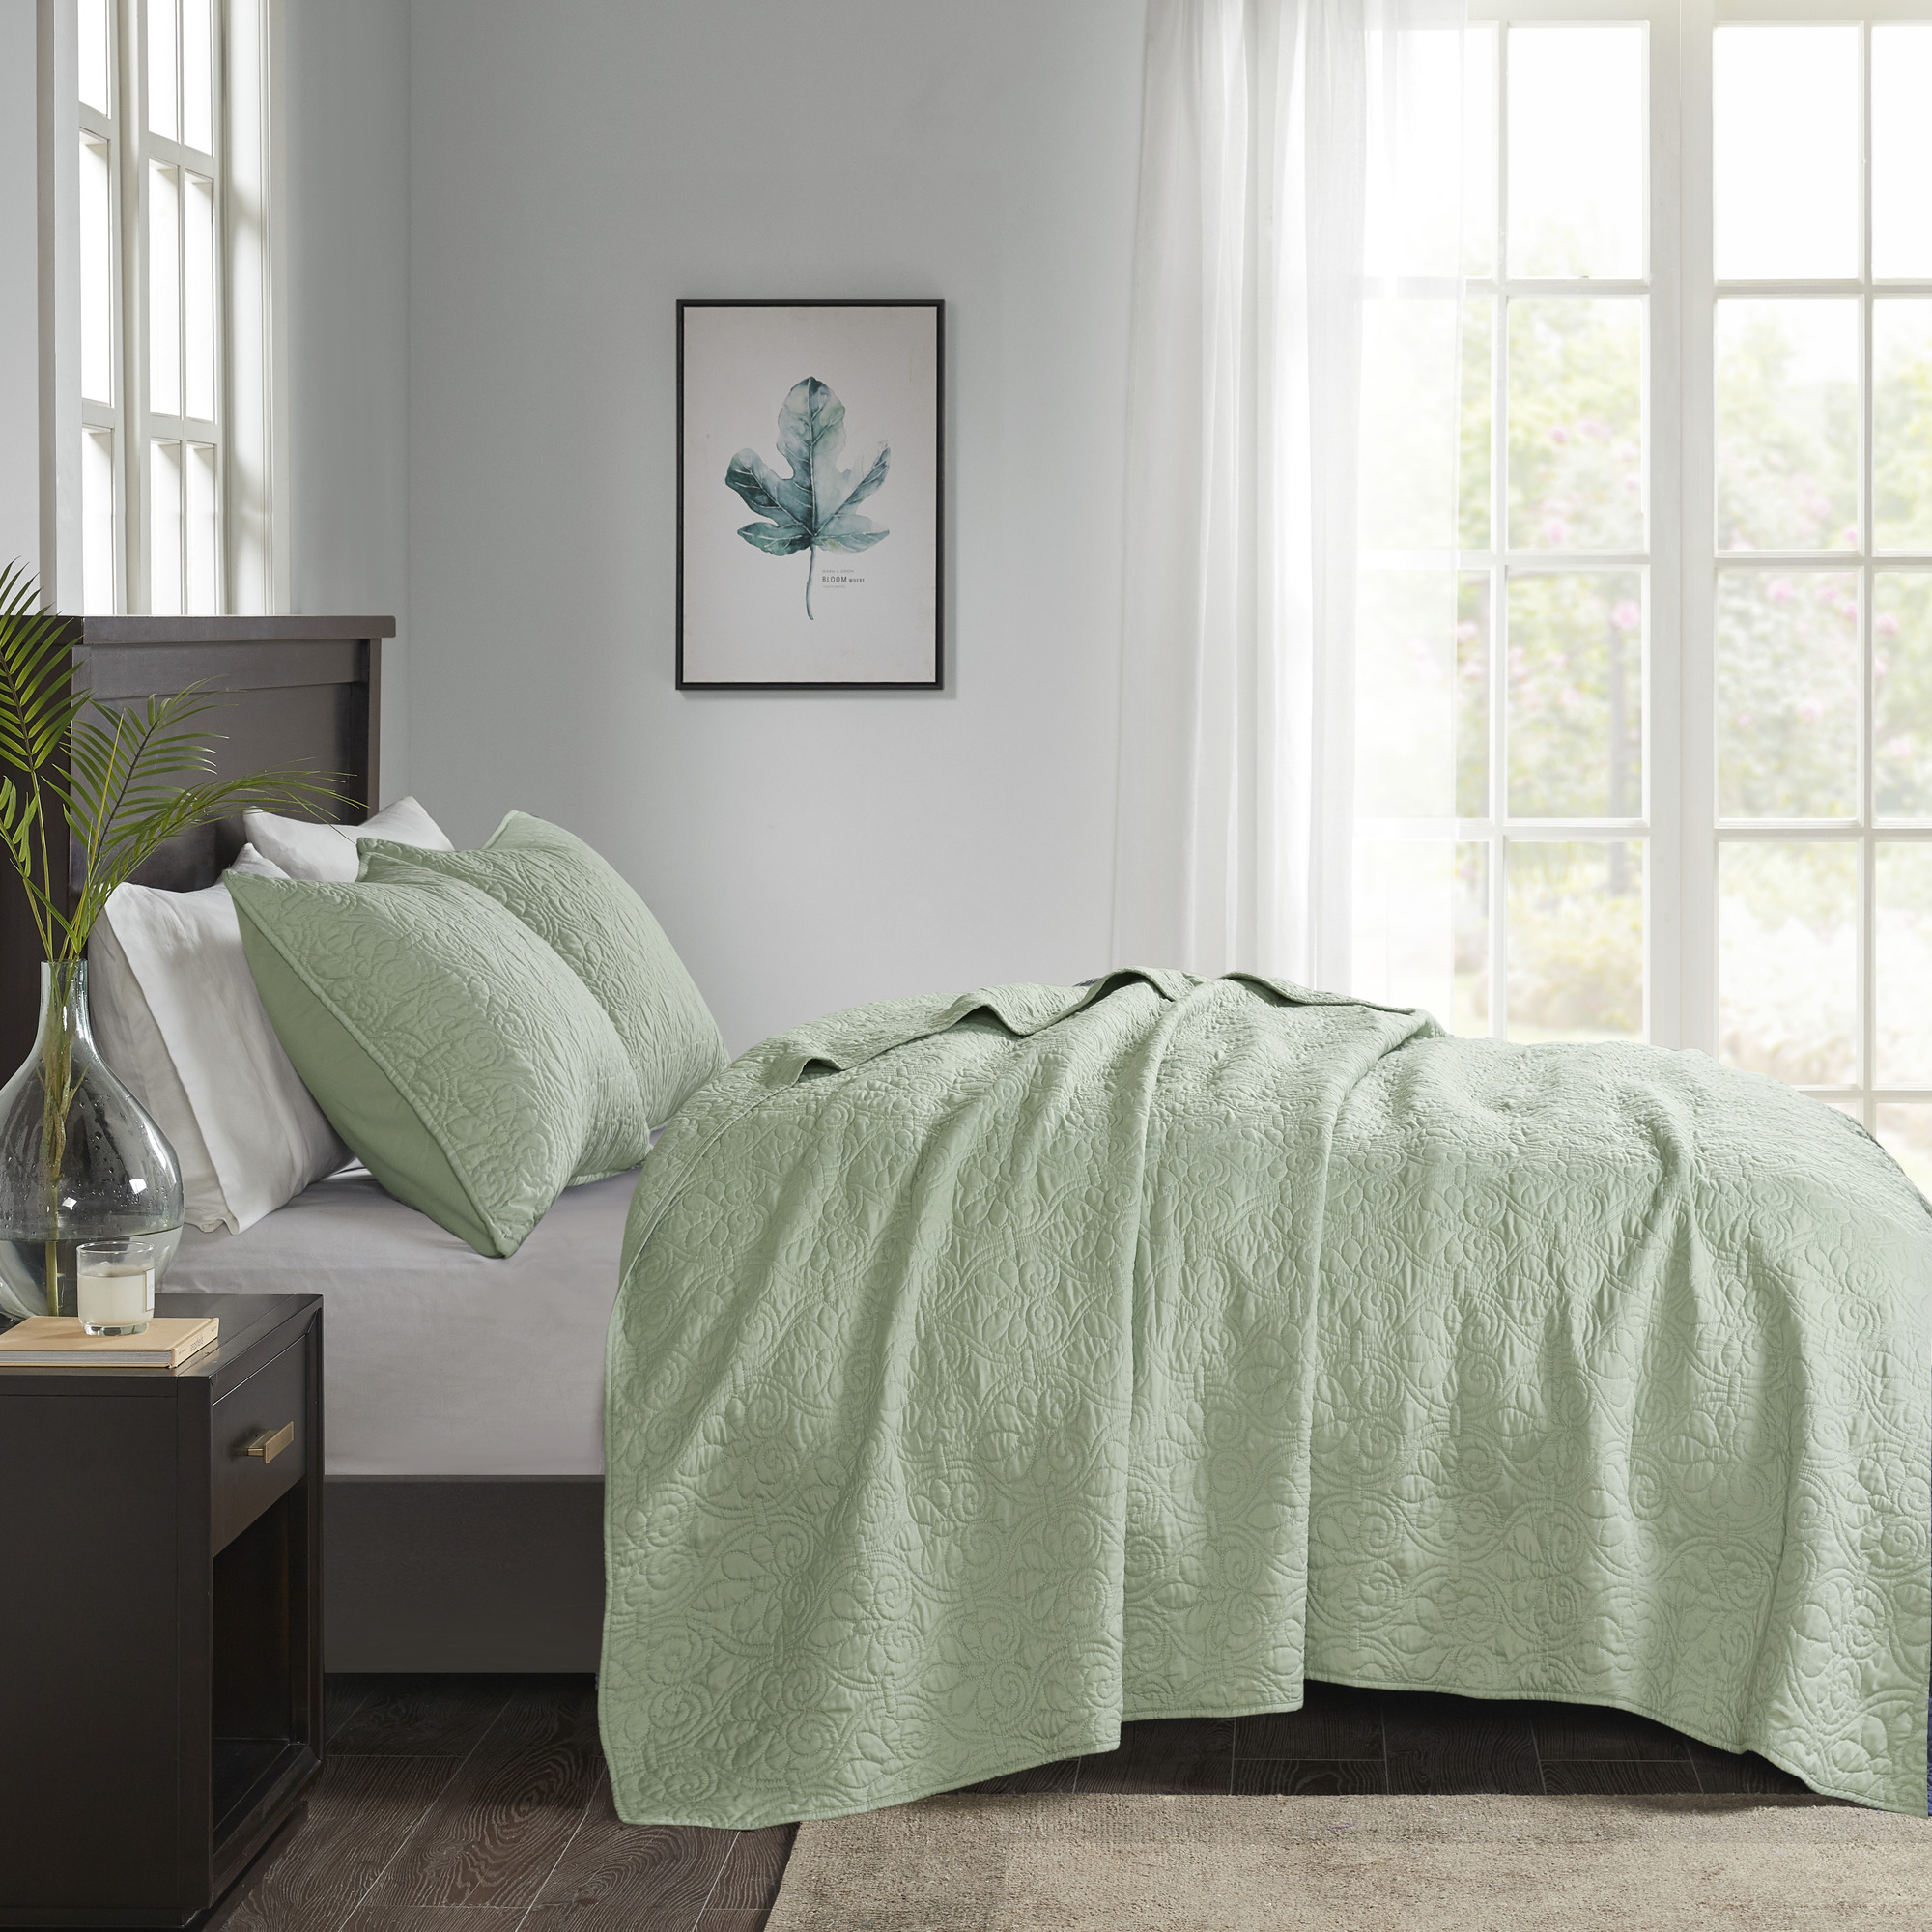 Home Essence Vancouver Super Soft Reversible Coverlet Set, Green, Full/Queen - image 2 of 12